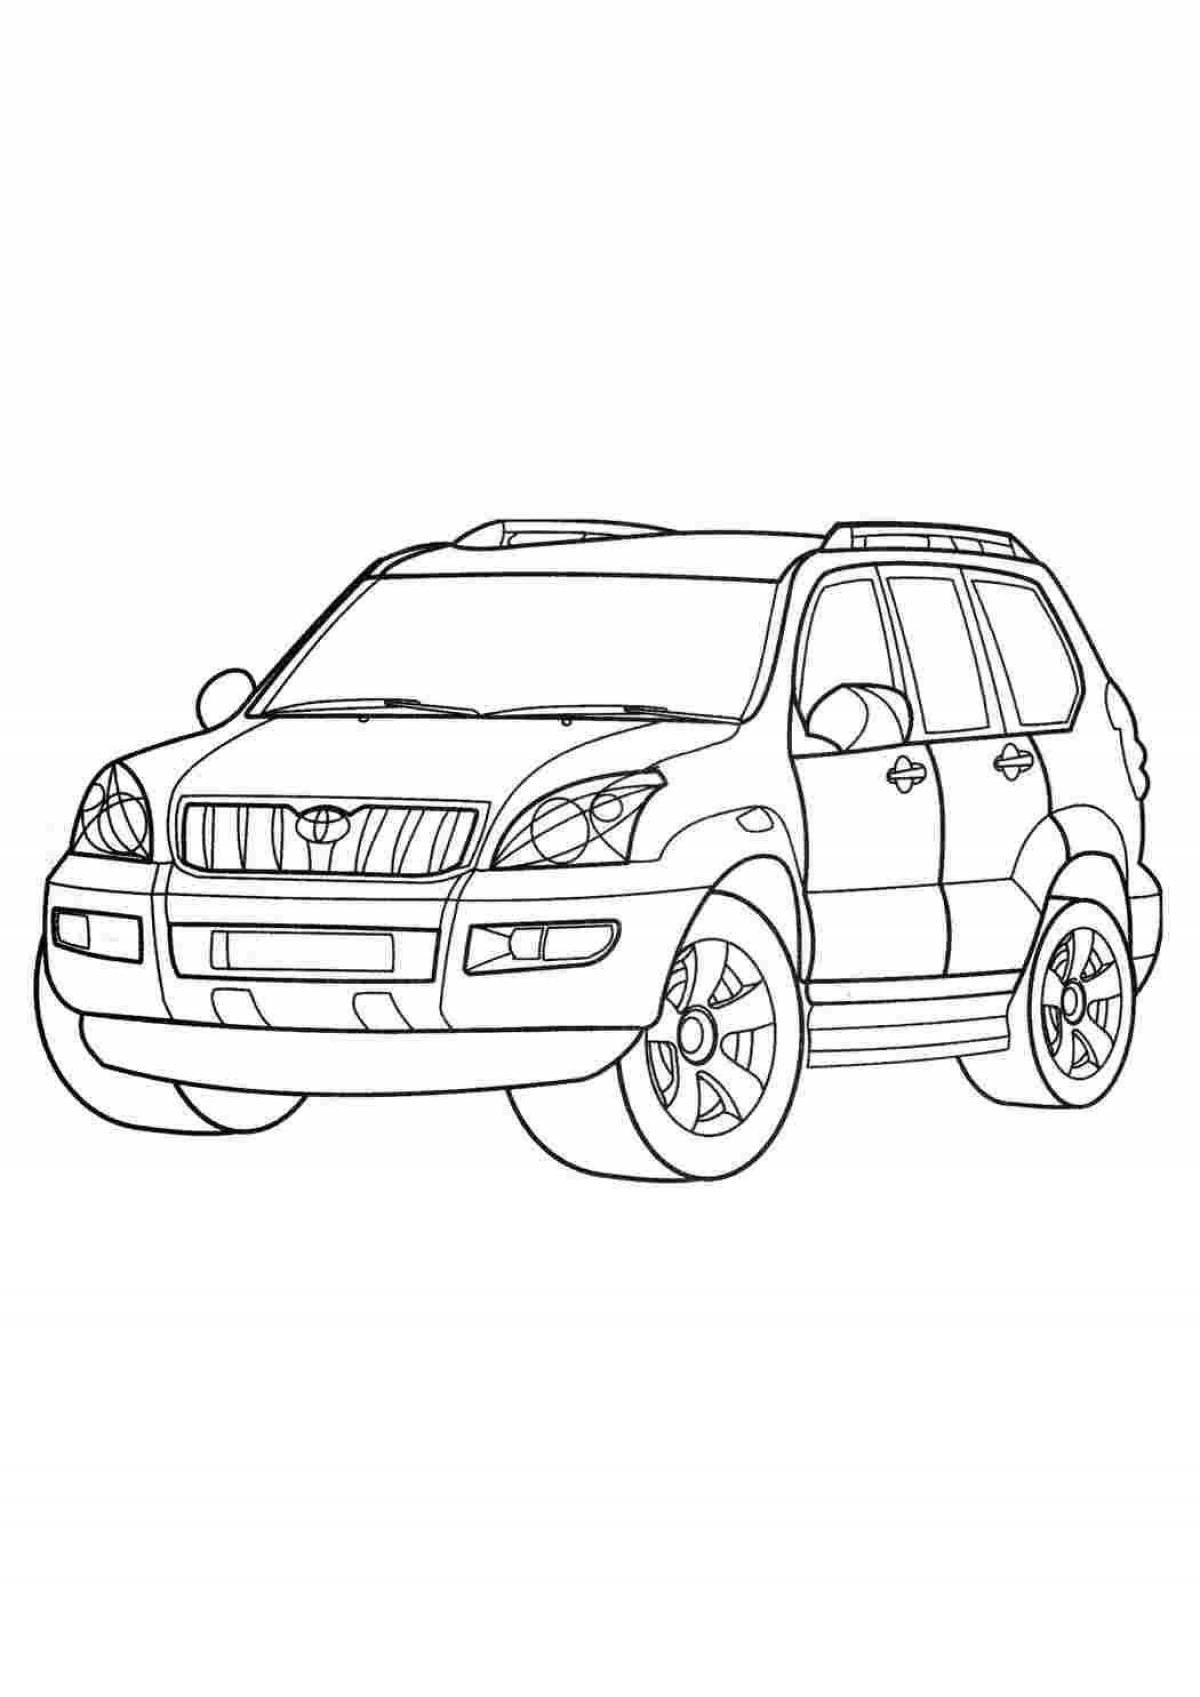 Toyota glamorous cars coloring page